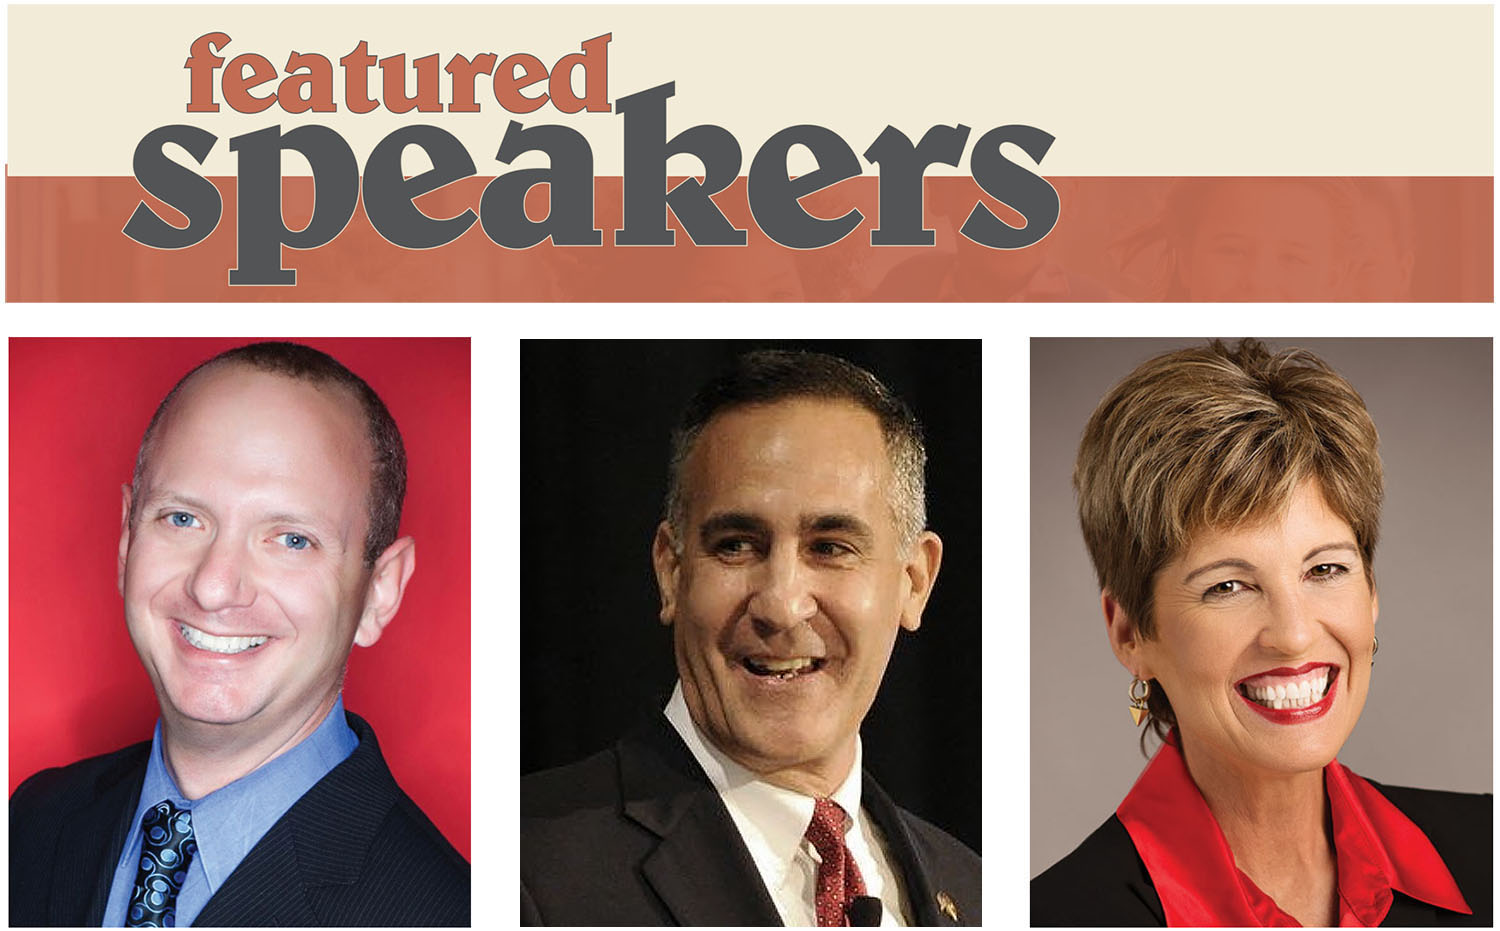 Click here to meet the 2023 Annual Convention featured speakers.